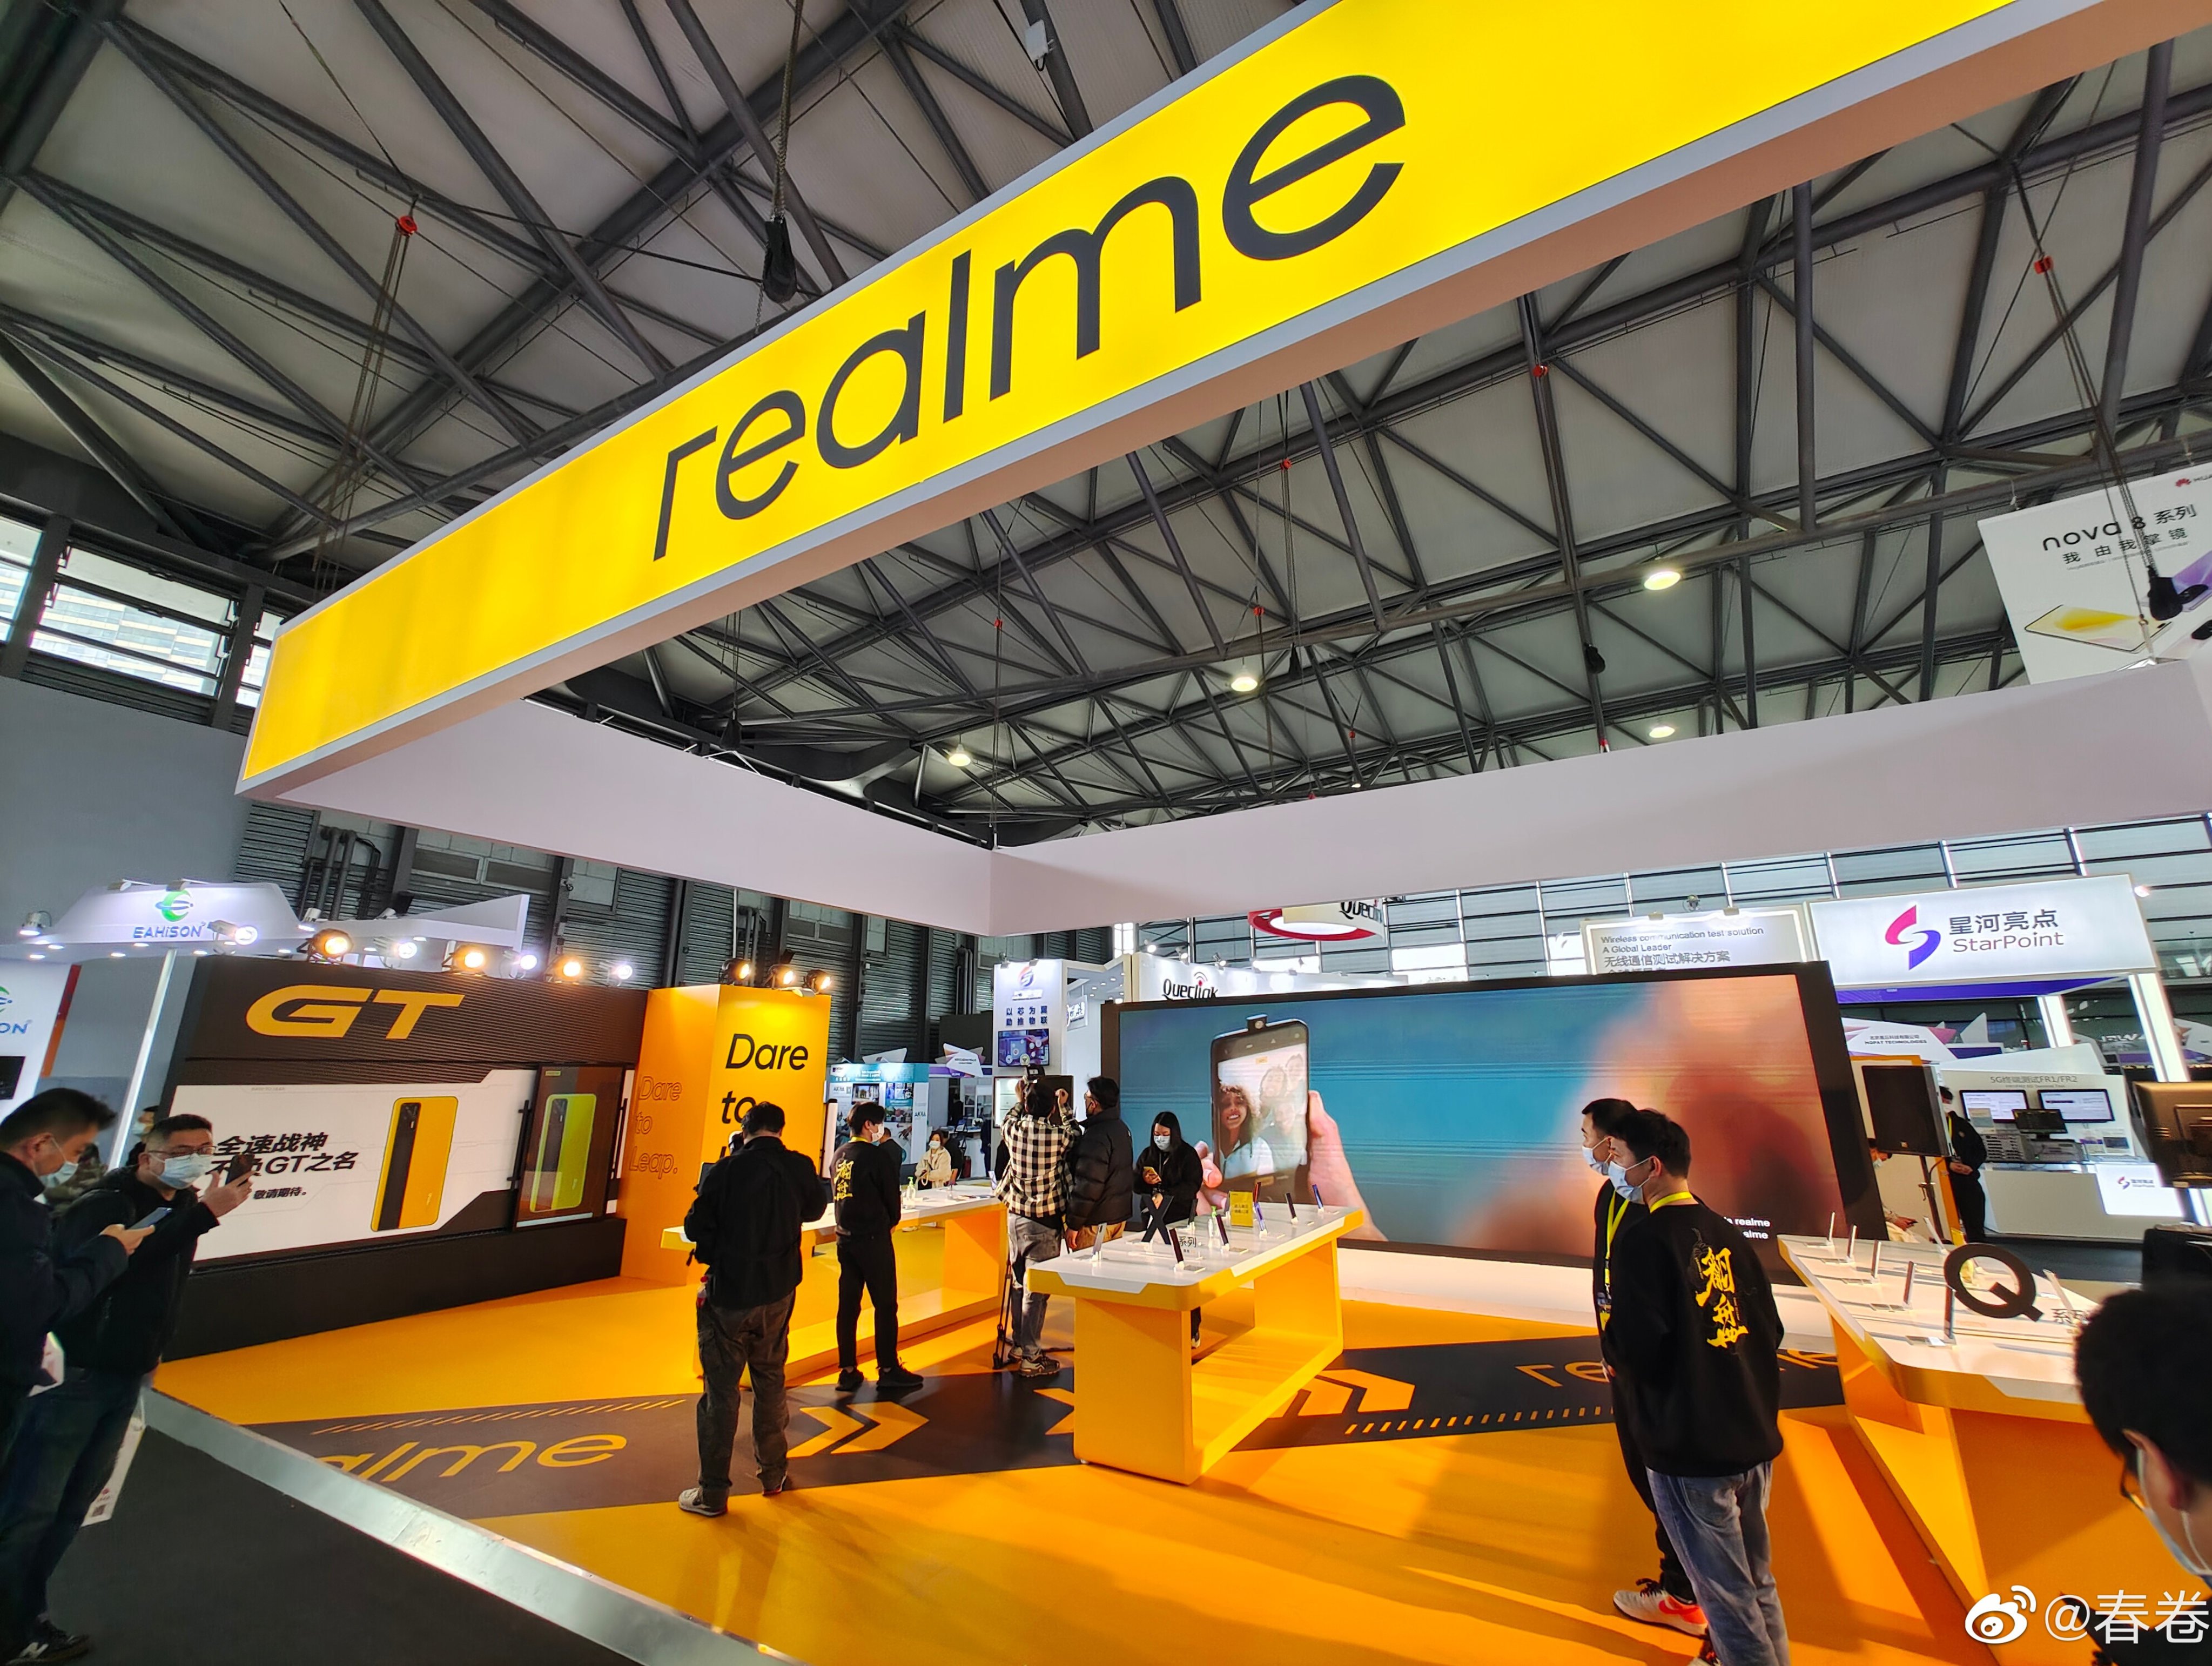 Chinese smartphone vendor Realme says it has shipped more than 200 million handsets to date. Photo: Handout